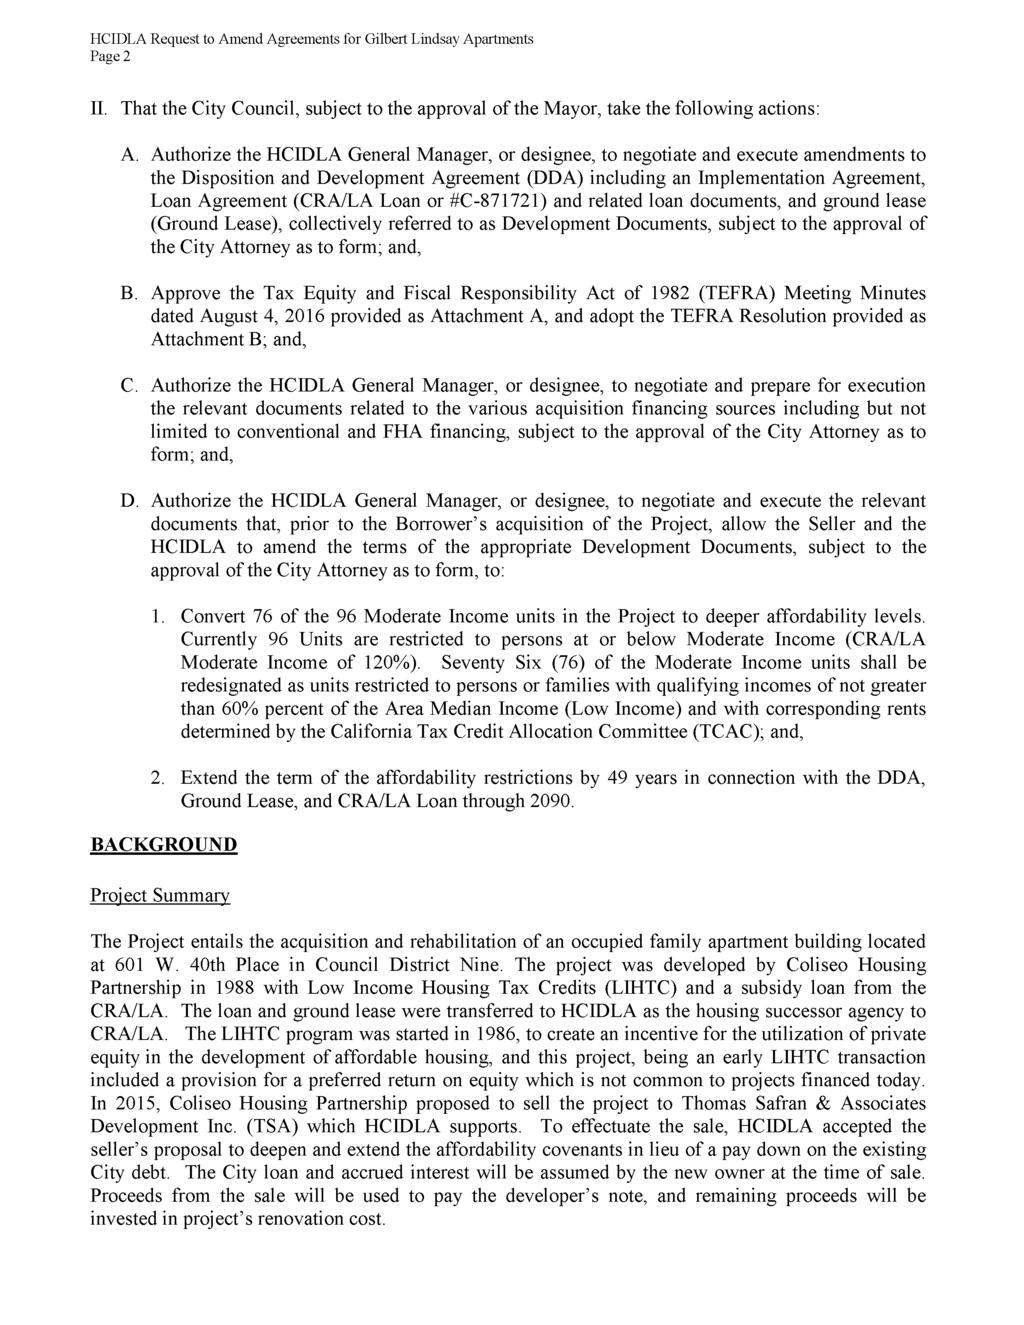 HCIDLA Request to Amend Agreements for Gilbert Lindsay Apartments Page 2 II. That the City Council, subject to the approval of the Mayor, take the following actions: A. B. C. D.